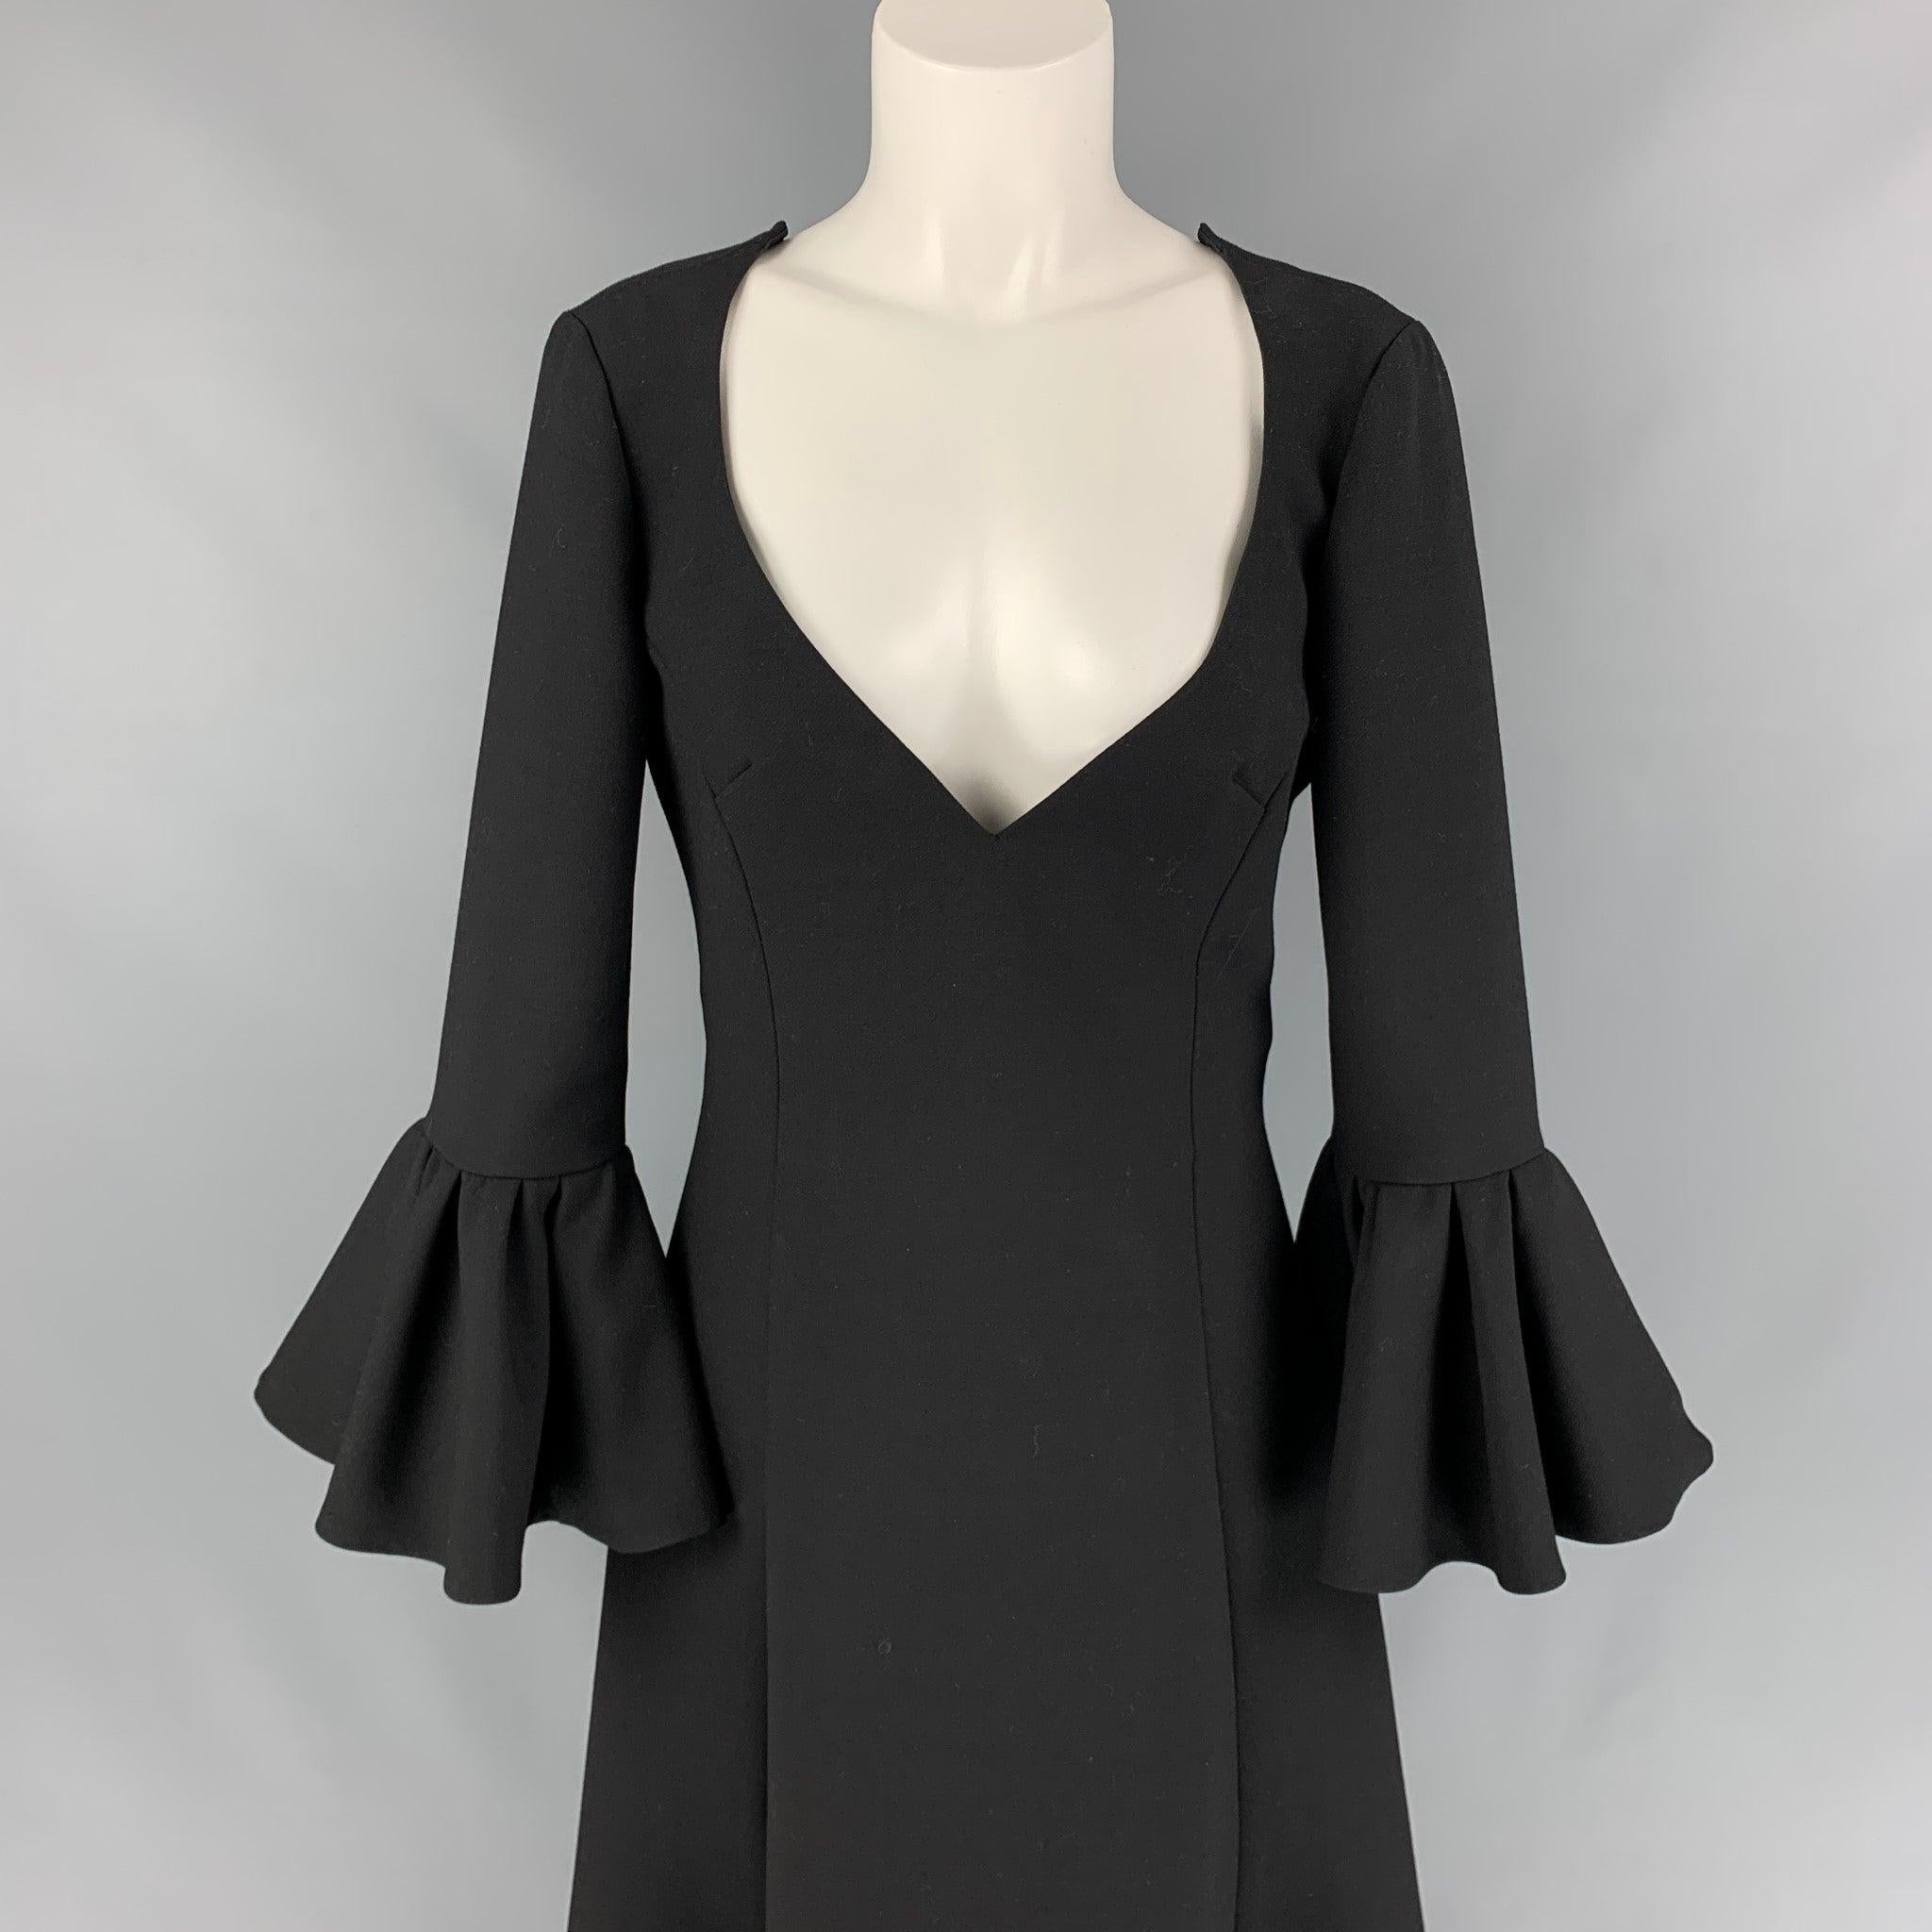 MARC JACOBS Fall 2019 Size 2 Black Wool Blend Deep V-Neck Ruffle Sleeve Dress In Good Condition For Sale In San Francisco, CA